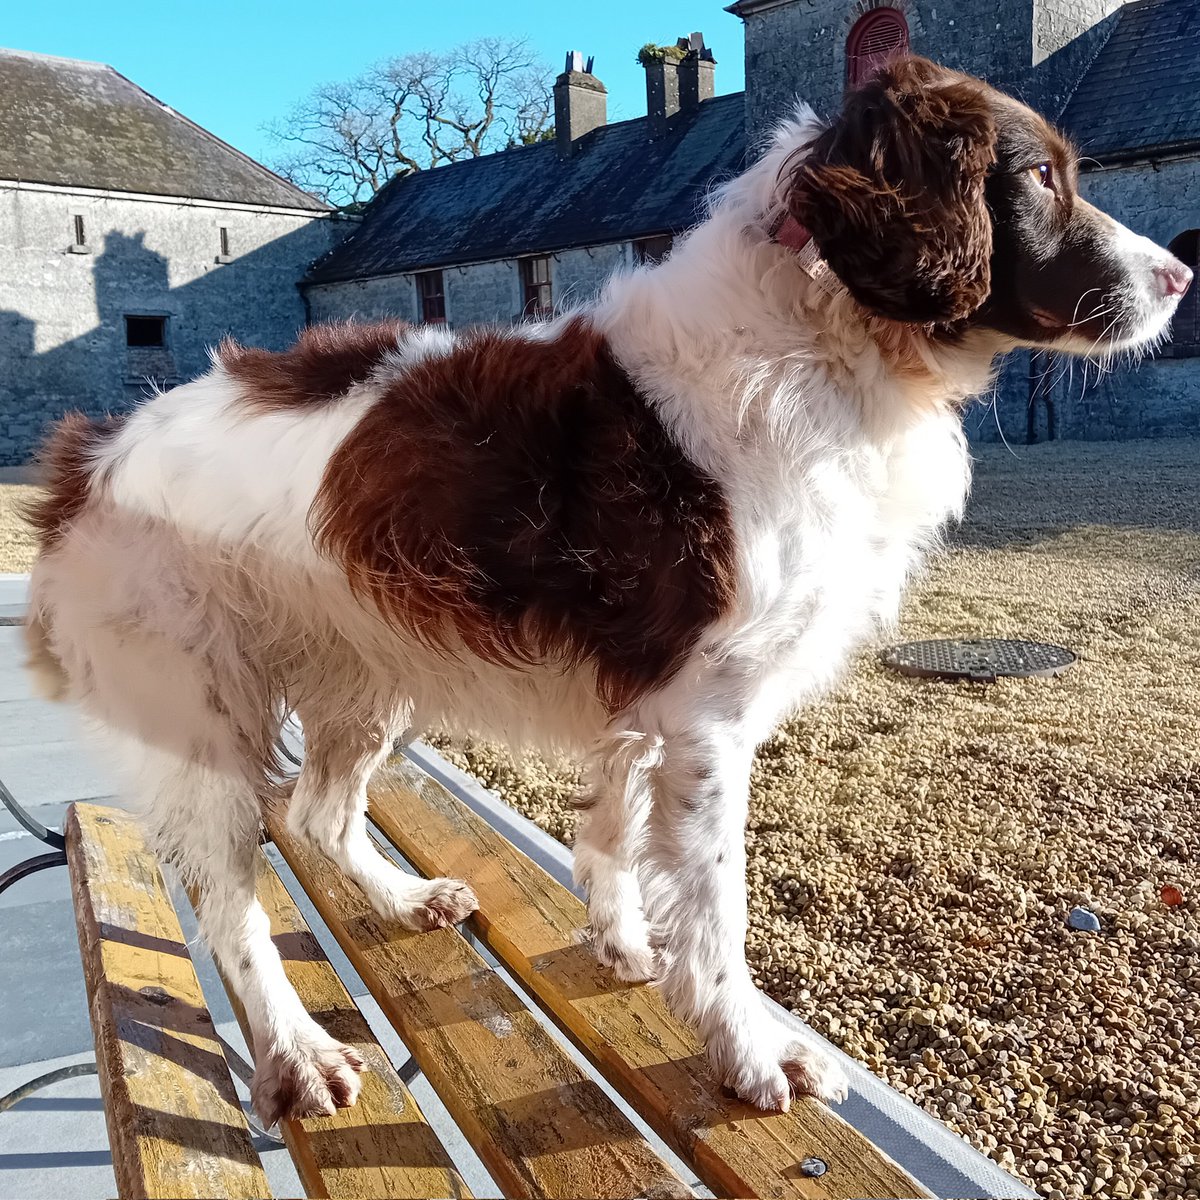 🎂🎂 Happy birthday to Cleo! Our brewery dog is 6 today, nearly respectable middle age, though you wouldn't know it by watching her charging around the farm. #Ballykilcavan #Laois #SpringerSpaniel